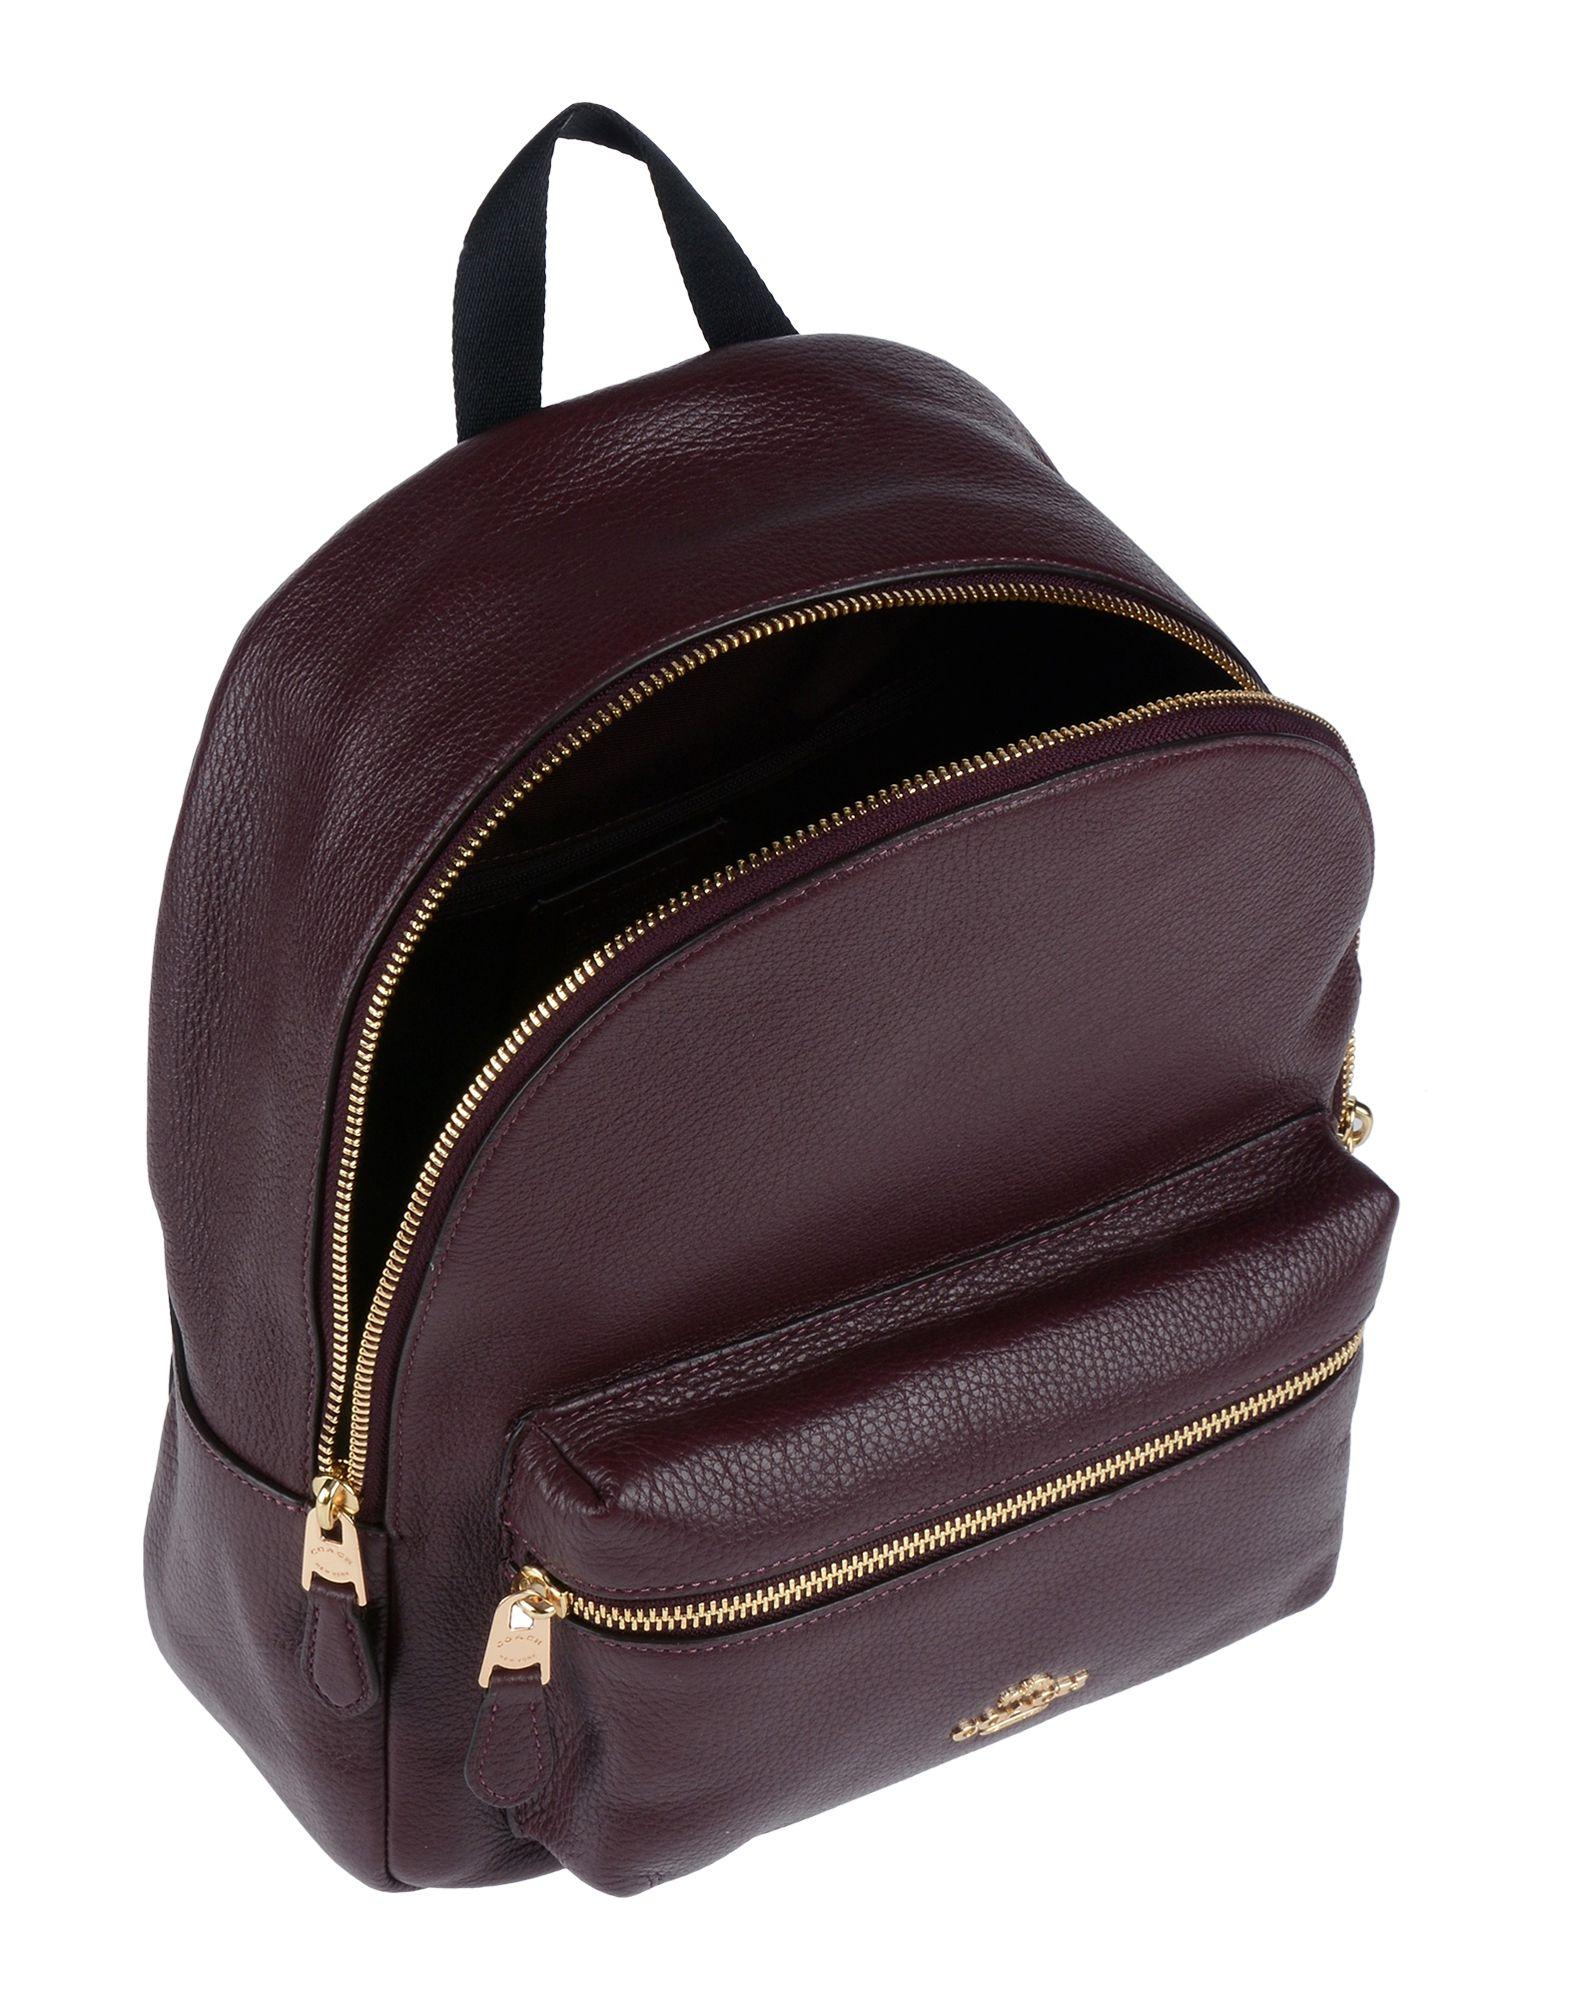 COACH Leather Backpacks & Fanny Packs - Lyst